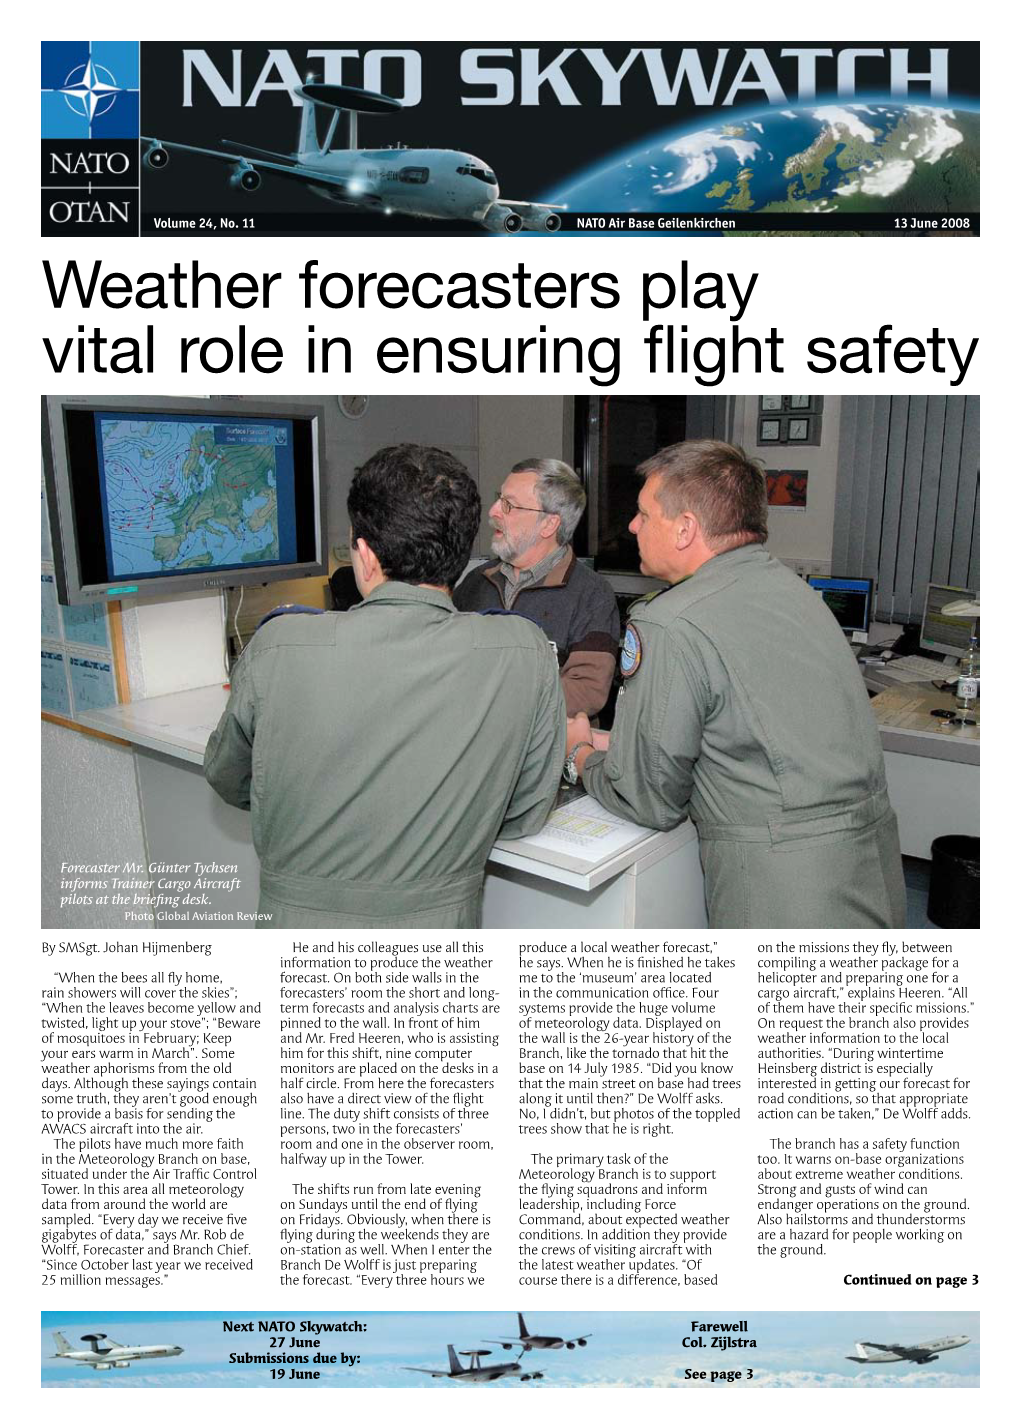 Weather Forecasters Play Vital Role in Ensuring Flight Safety